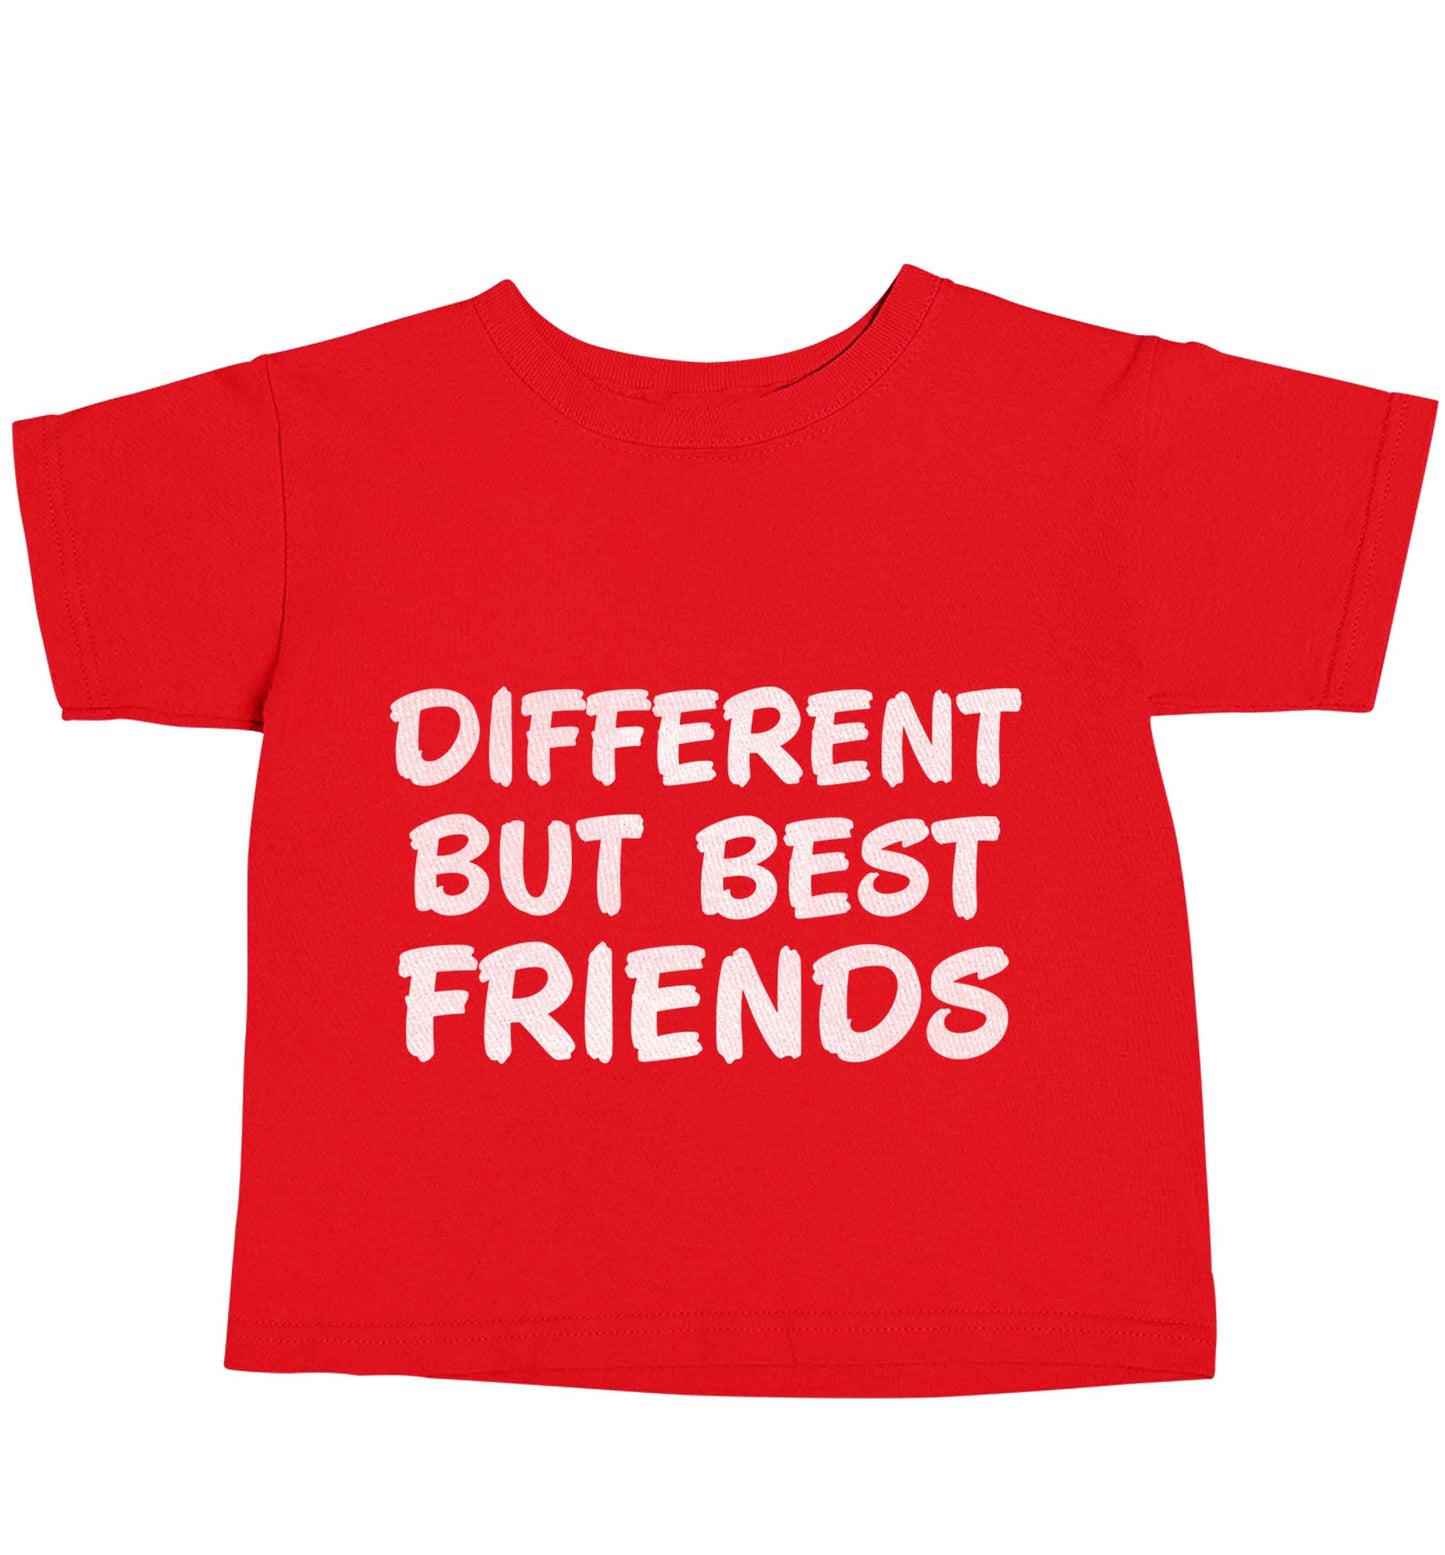 Different but best friends red baby toddler Tshirt 2 Years